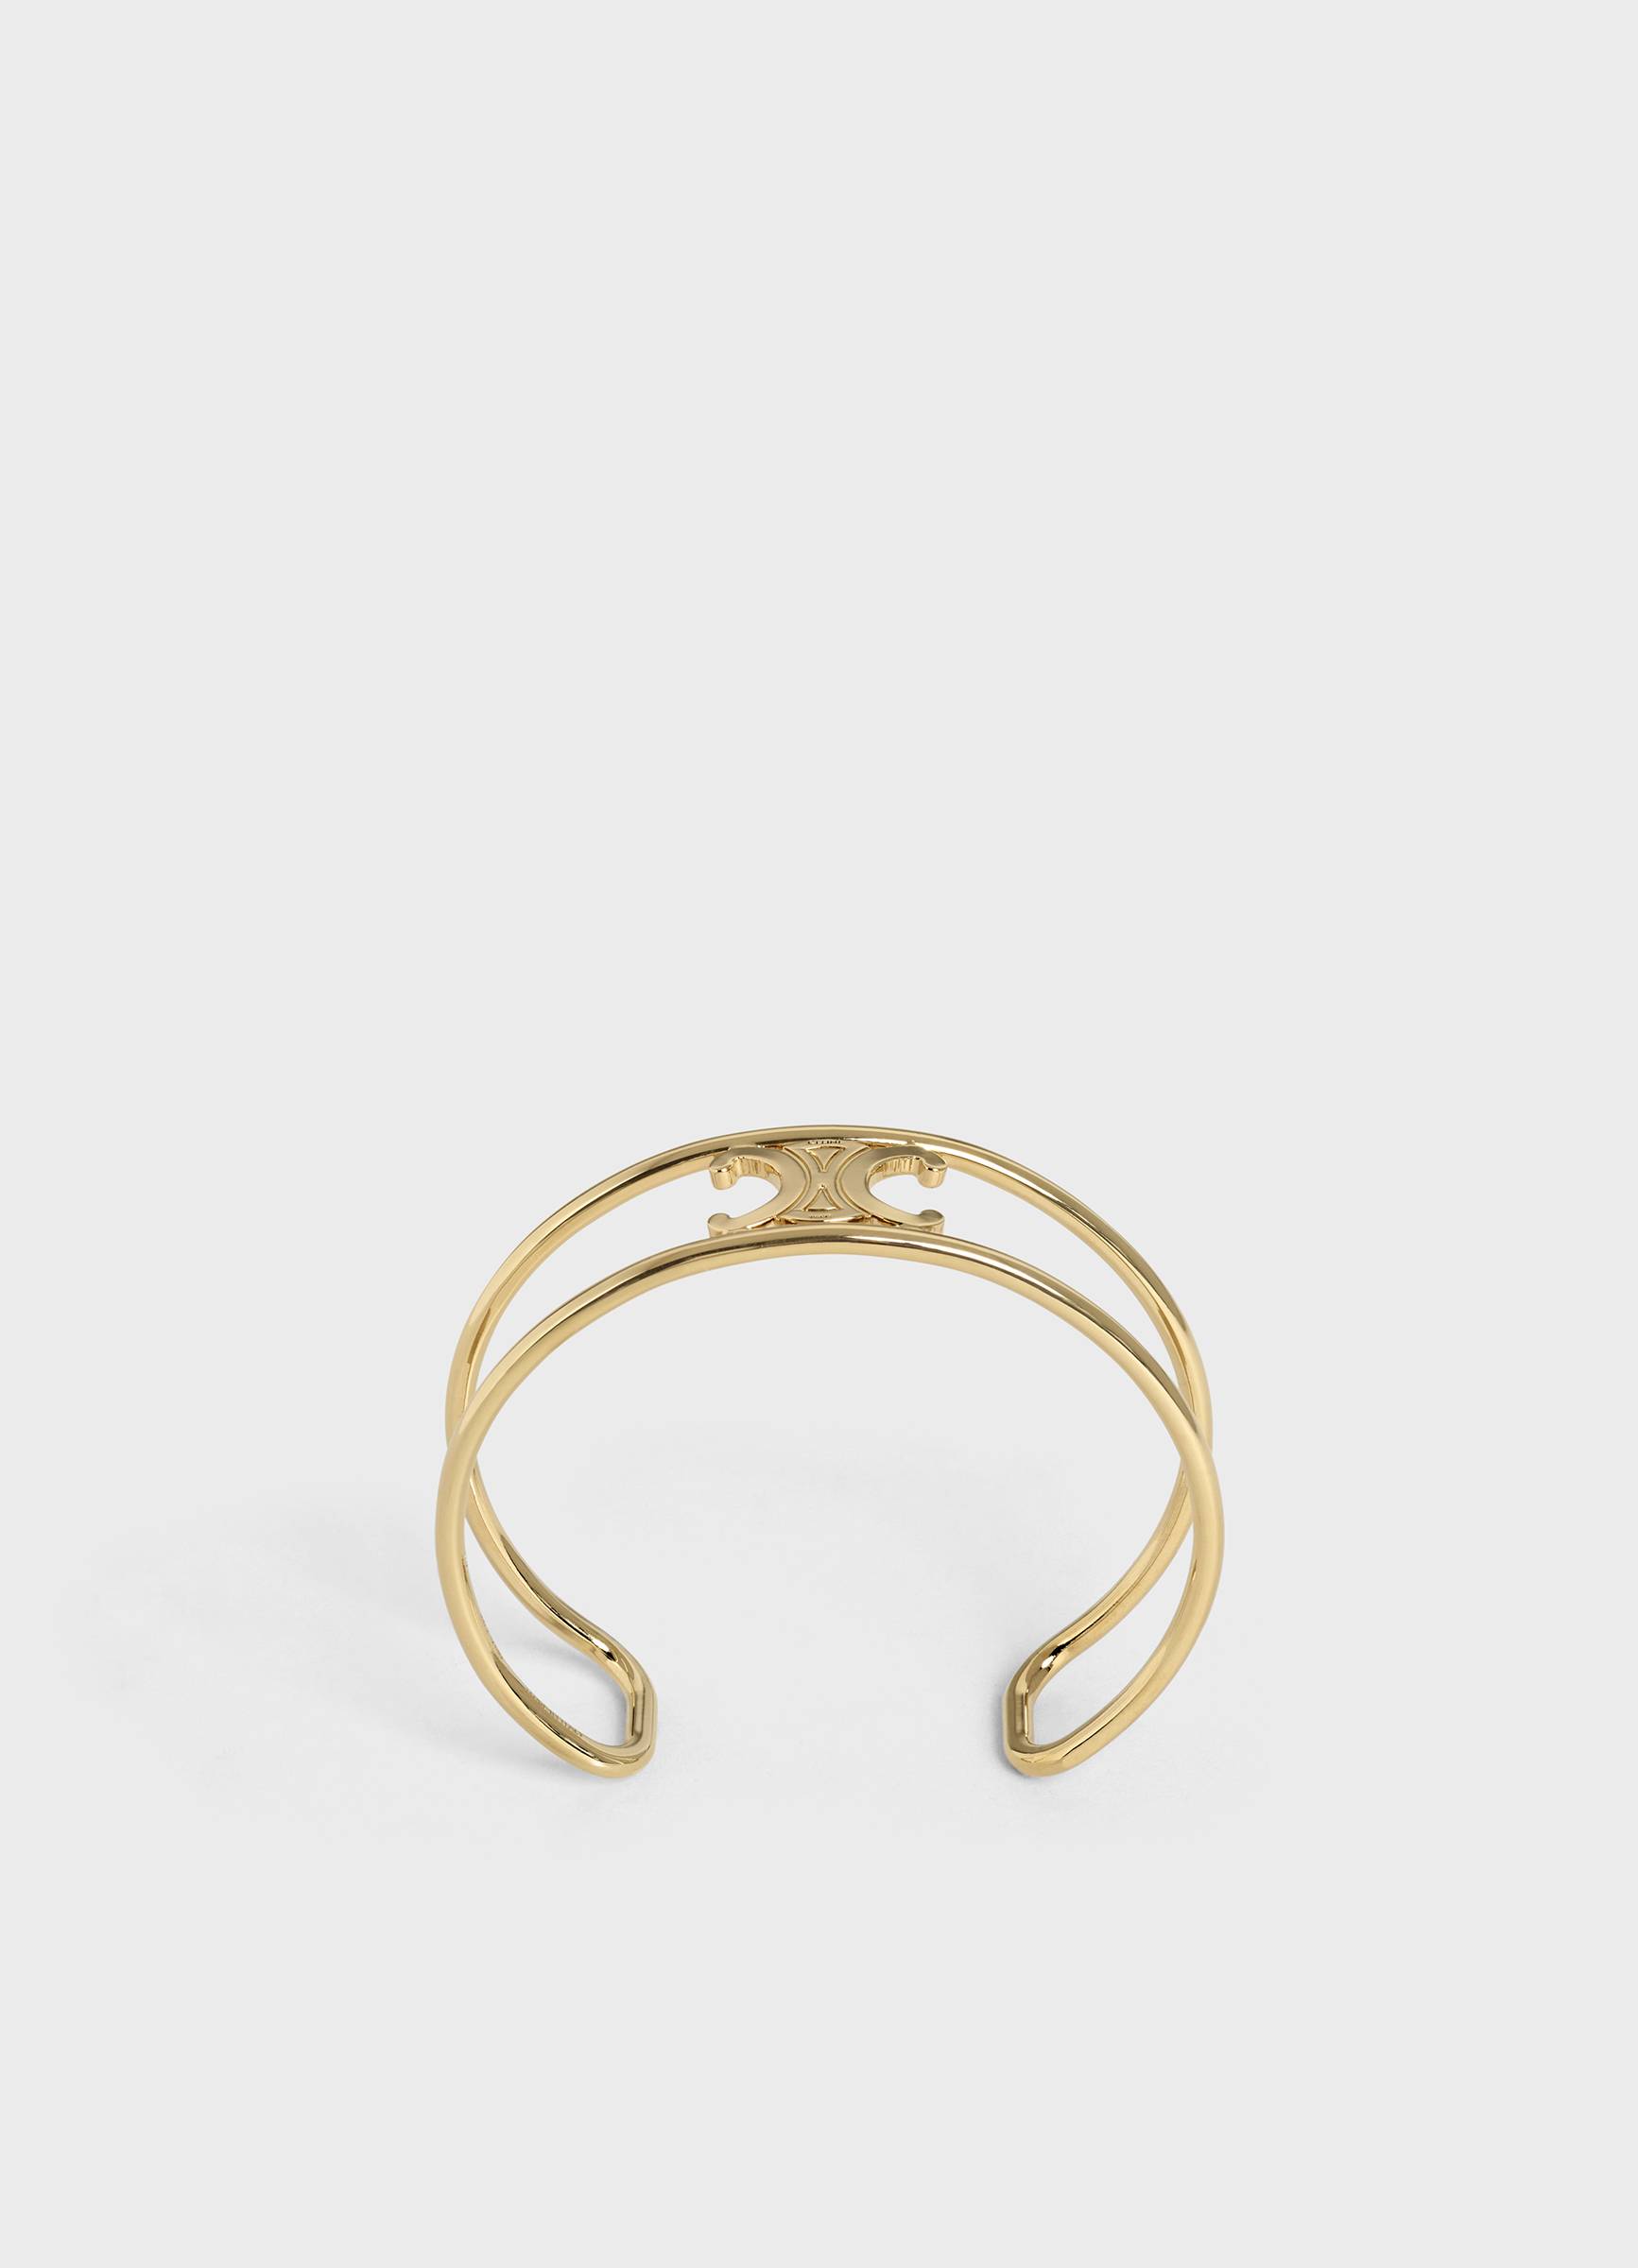 MAILLON TRIOMPHE CUFF IN BRASS WITH GOLD FINISH $4,100